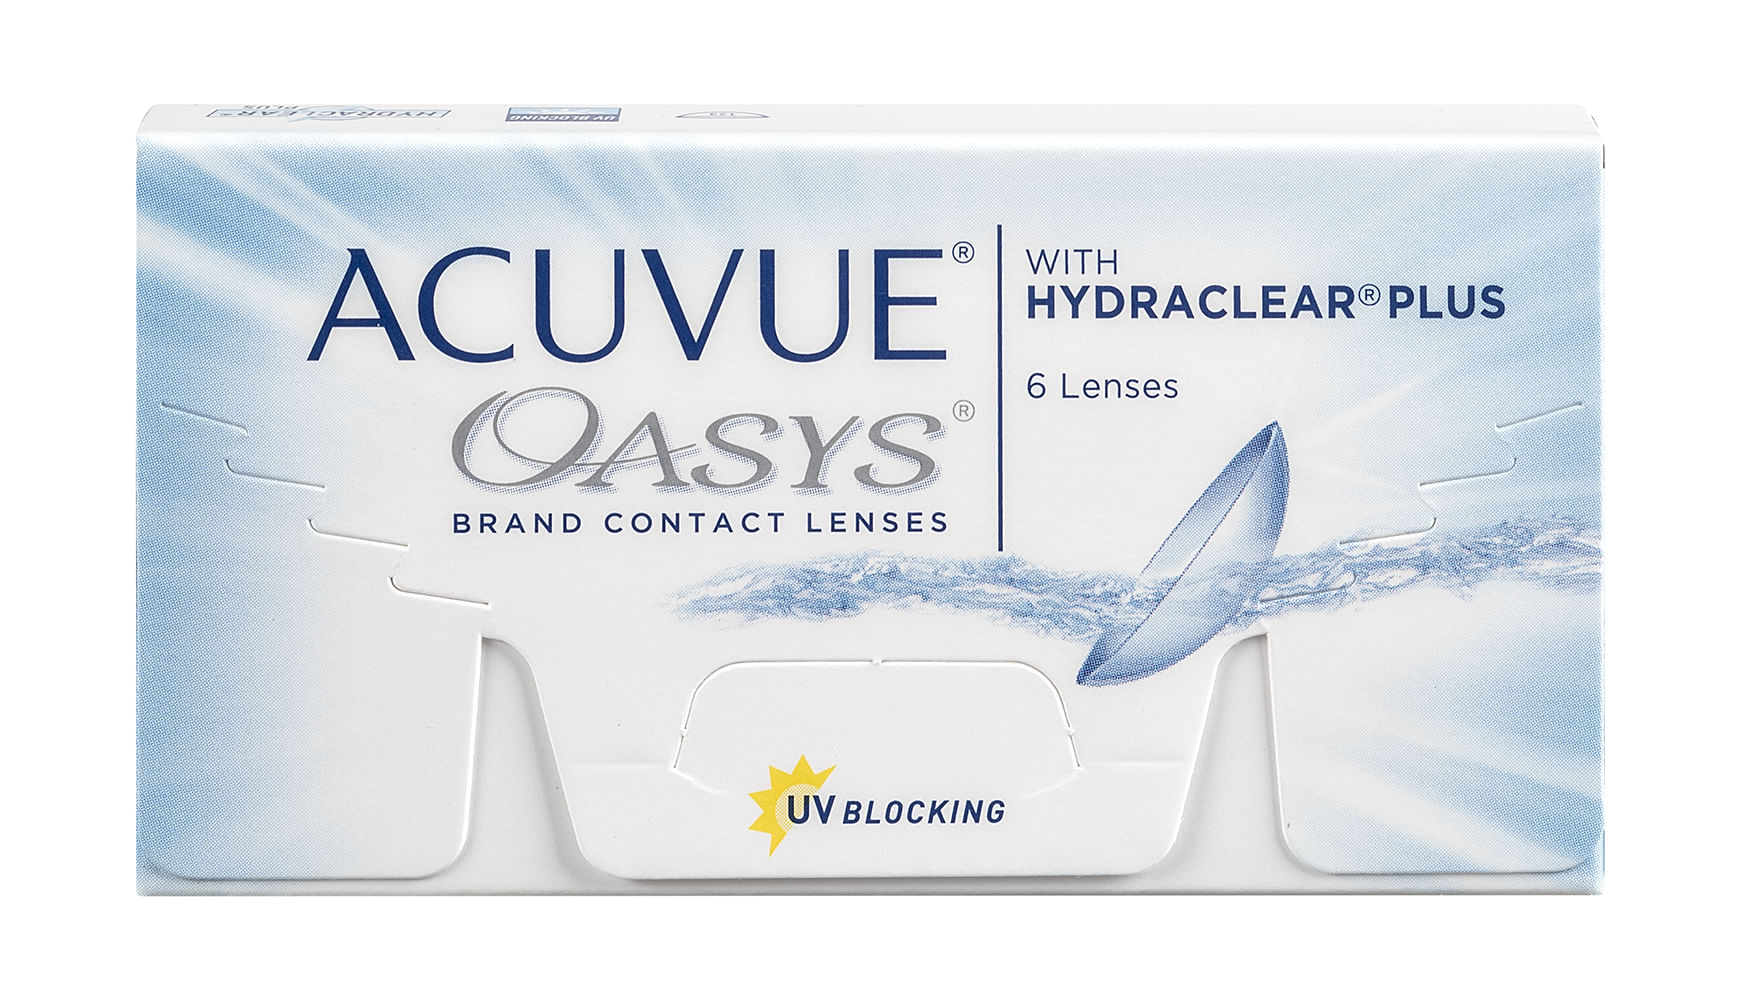 ACUVUE Oasys com Hydraclear Plus